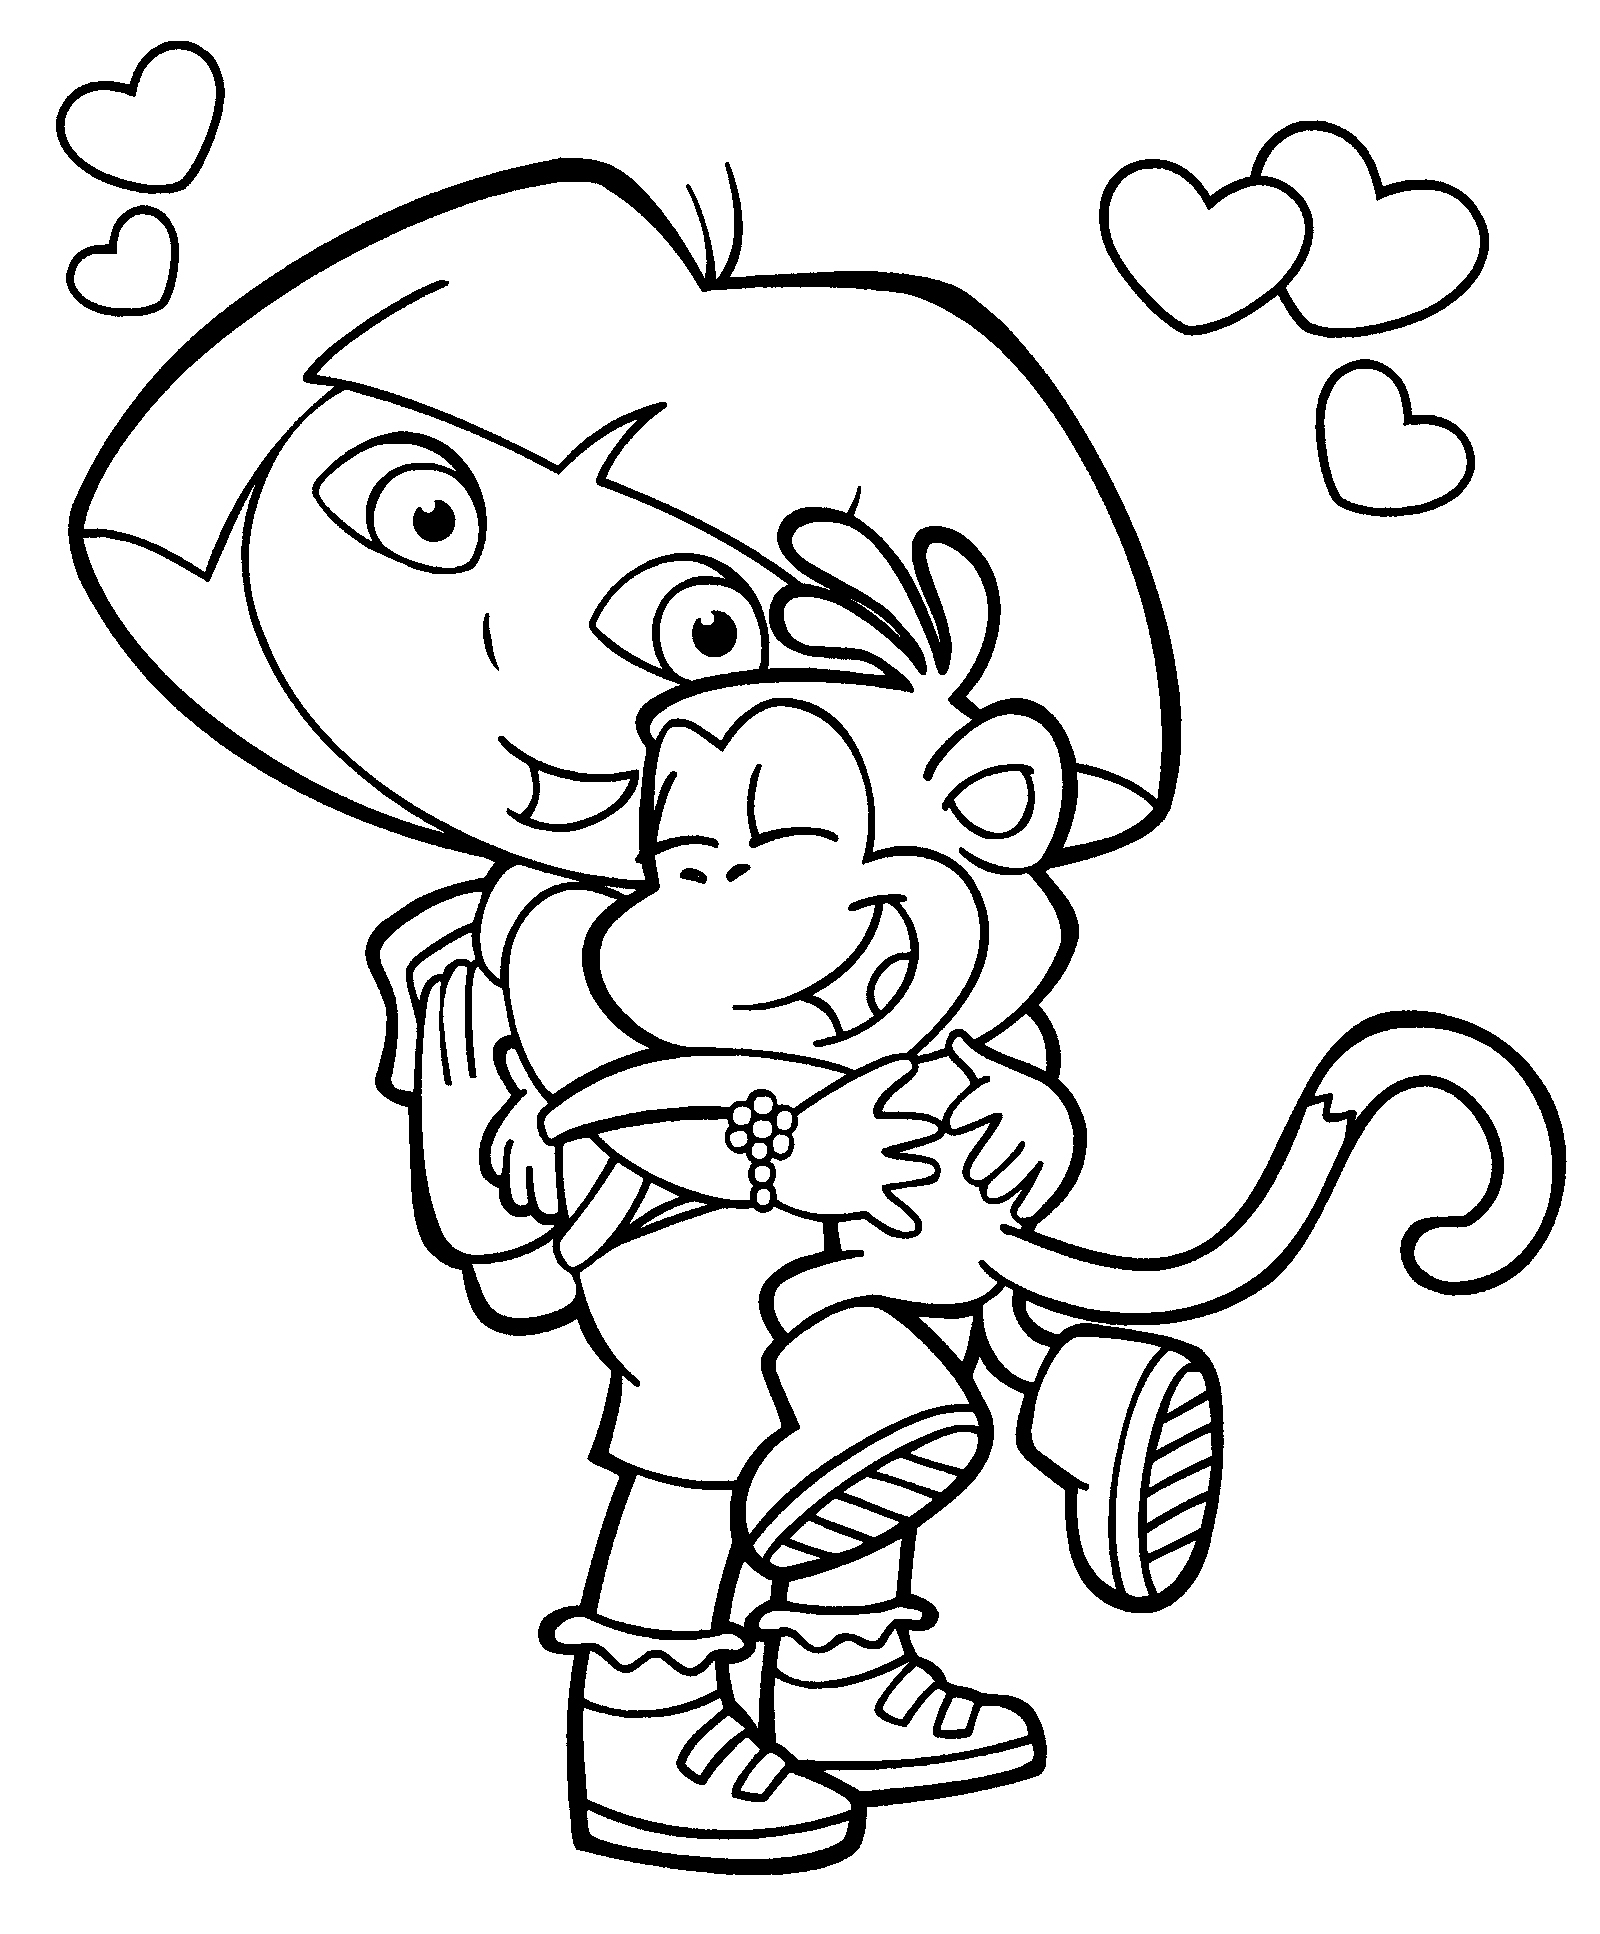 nickelodeon coloring pages online nick jr coloring pages